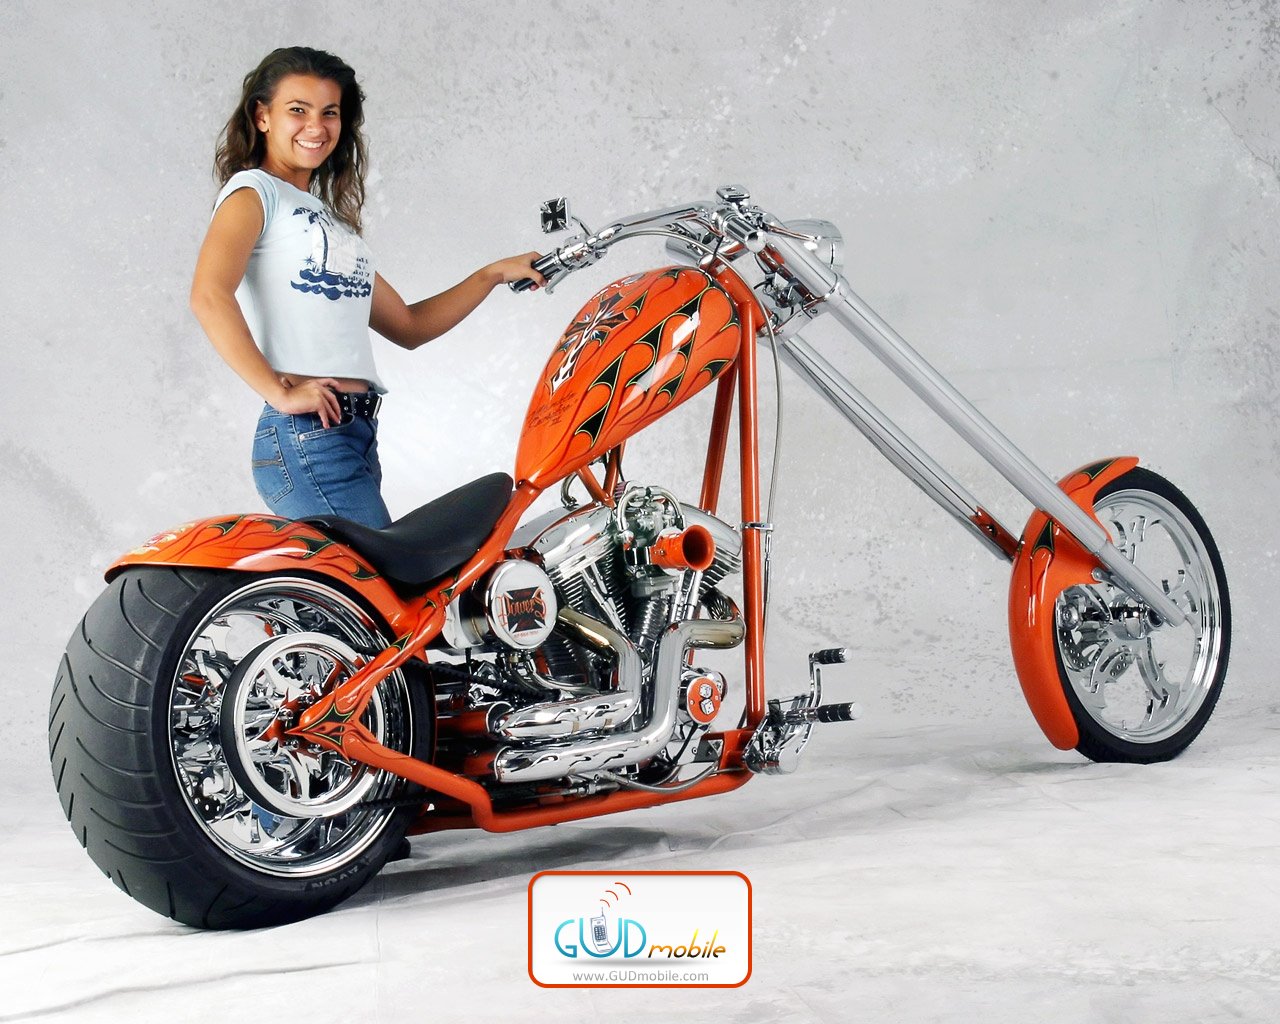 Girls And Bike HD Wallpaper High Resolution Pictures